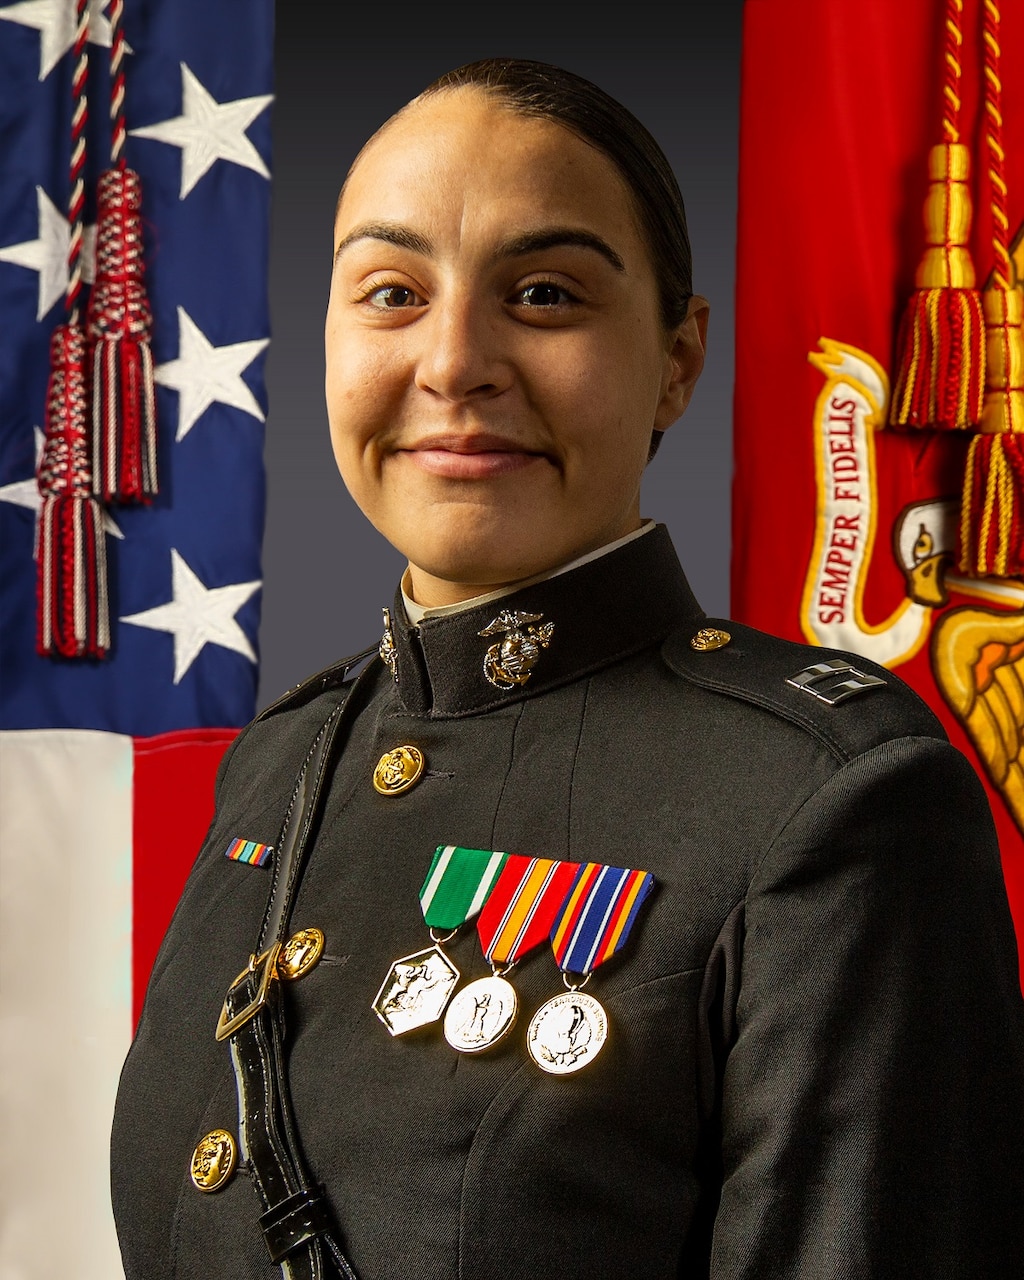 A woman in dress uniform poses for a photo.